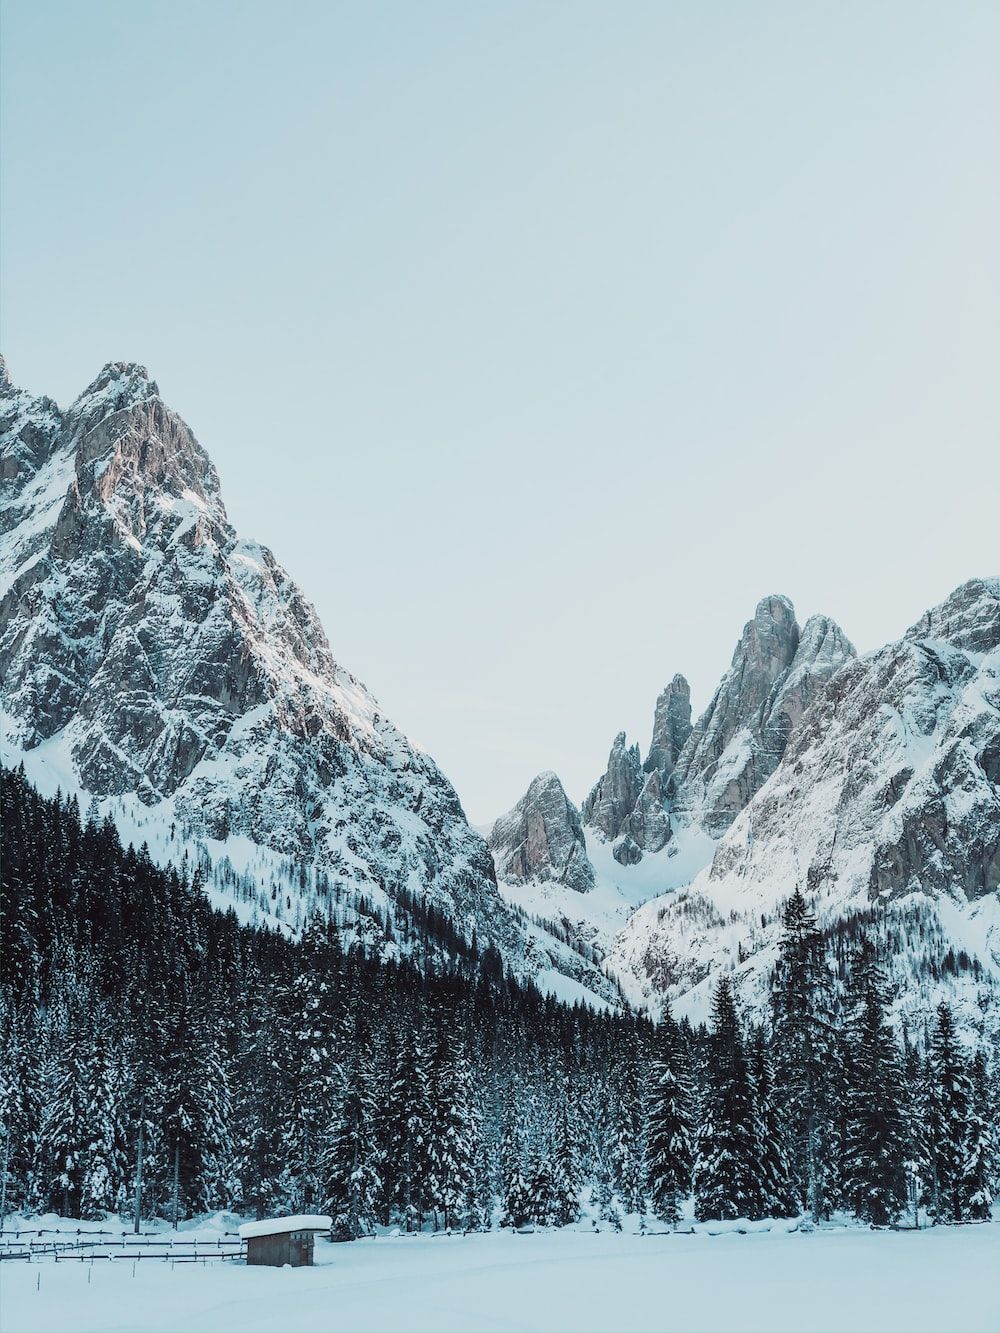 Winter Aesthetic Picture. Download Free Image